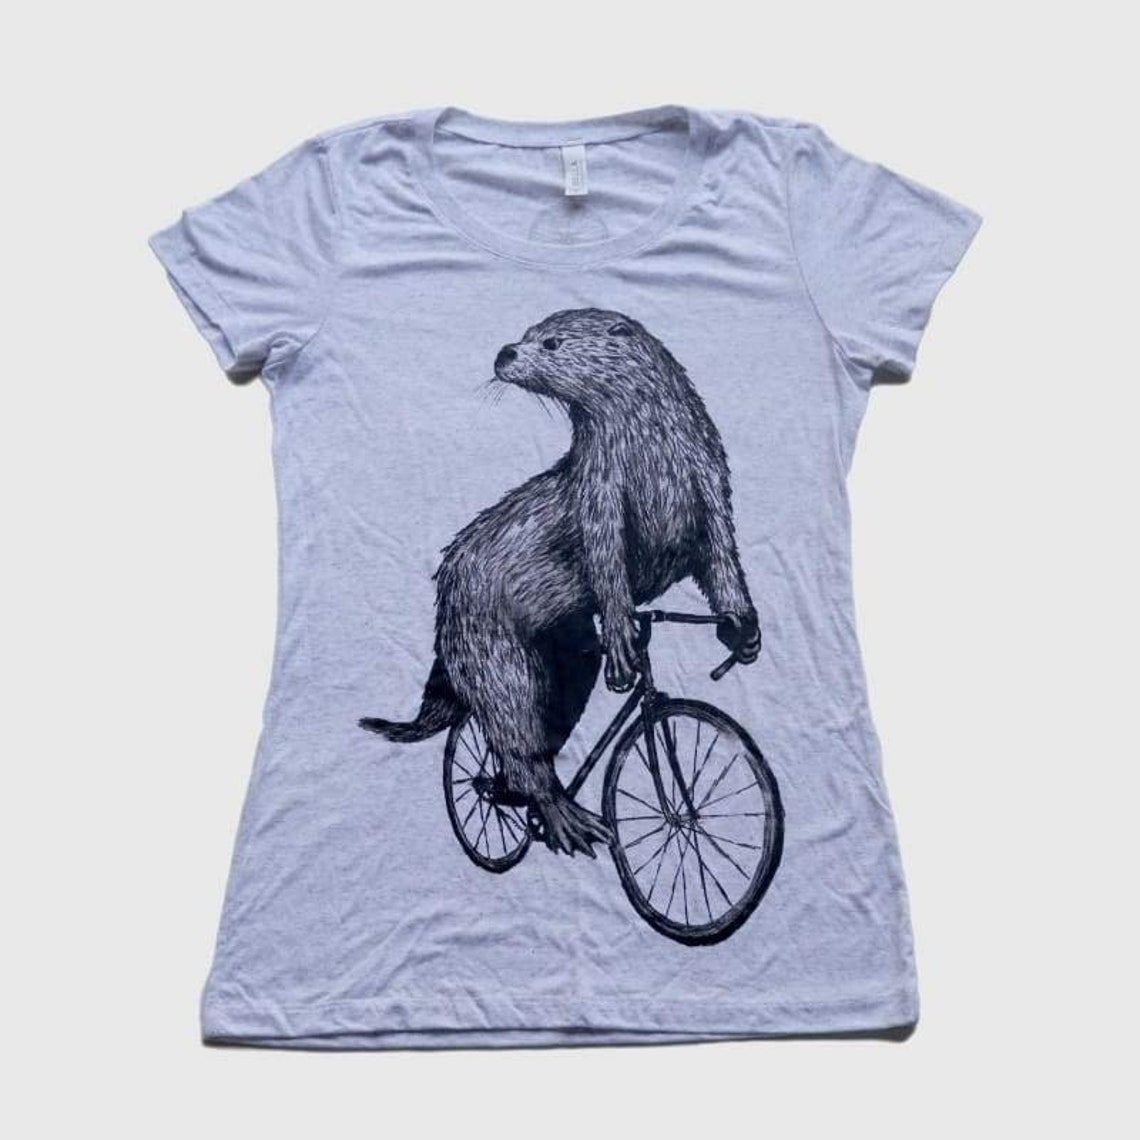 Otter Shirt an Otter Riding A Bicycle Screen Printed - Etsy